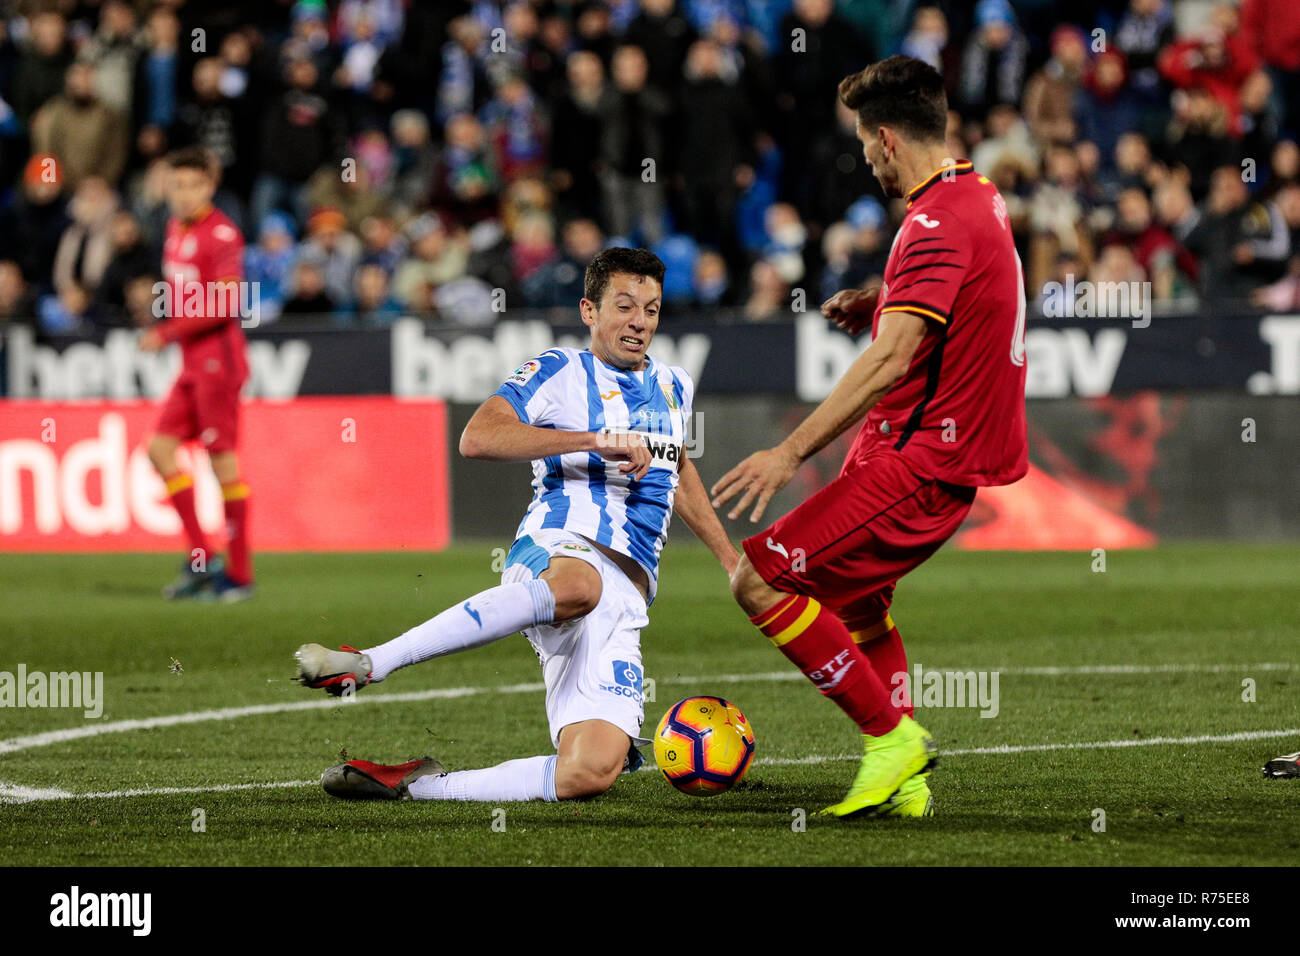 CD Leganes' Kenneth Josiah Omeruo and Getafe CF's Leandro Cabrera seen in action during the La Liga match between CD Leganes and Getafe CF at Butarque Stadium in Leganes, Spain. (Final score: CD Leganes 1 - 1 Getafe CF) Stock Photo